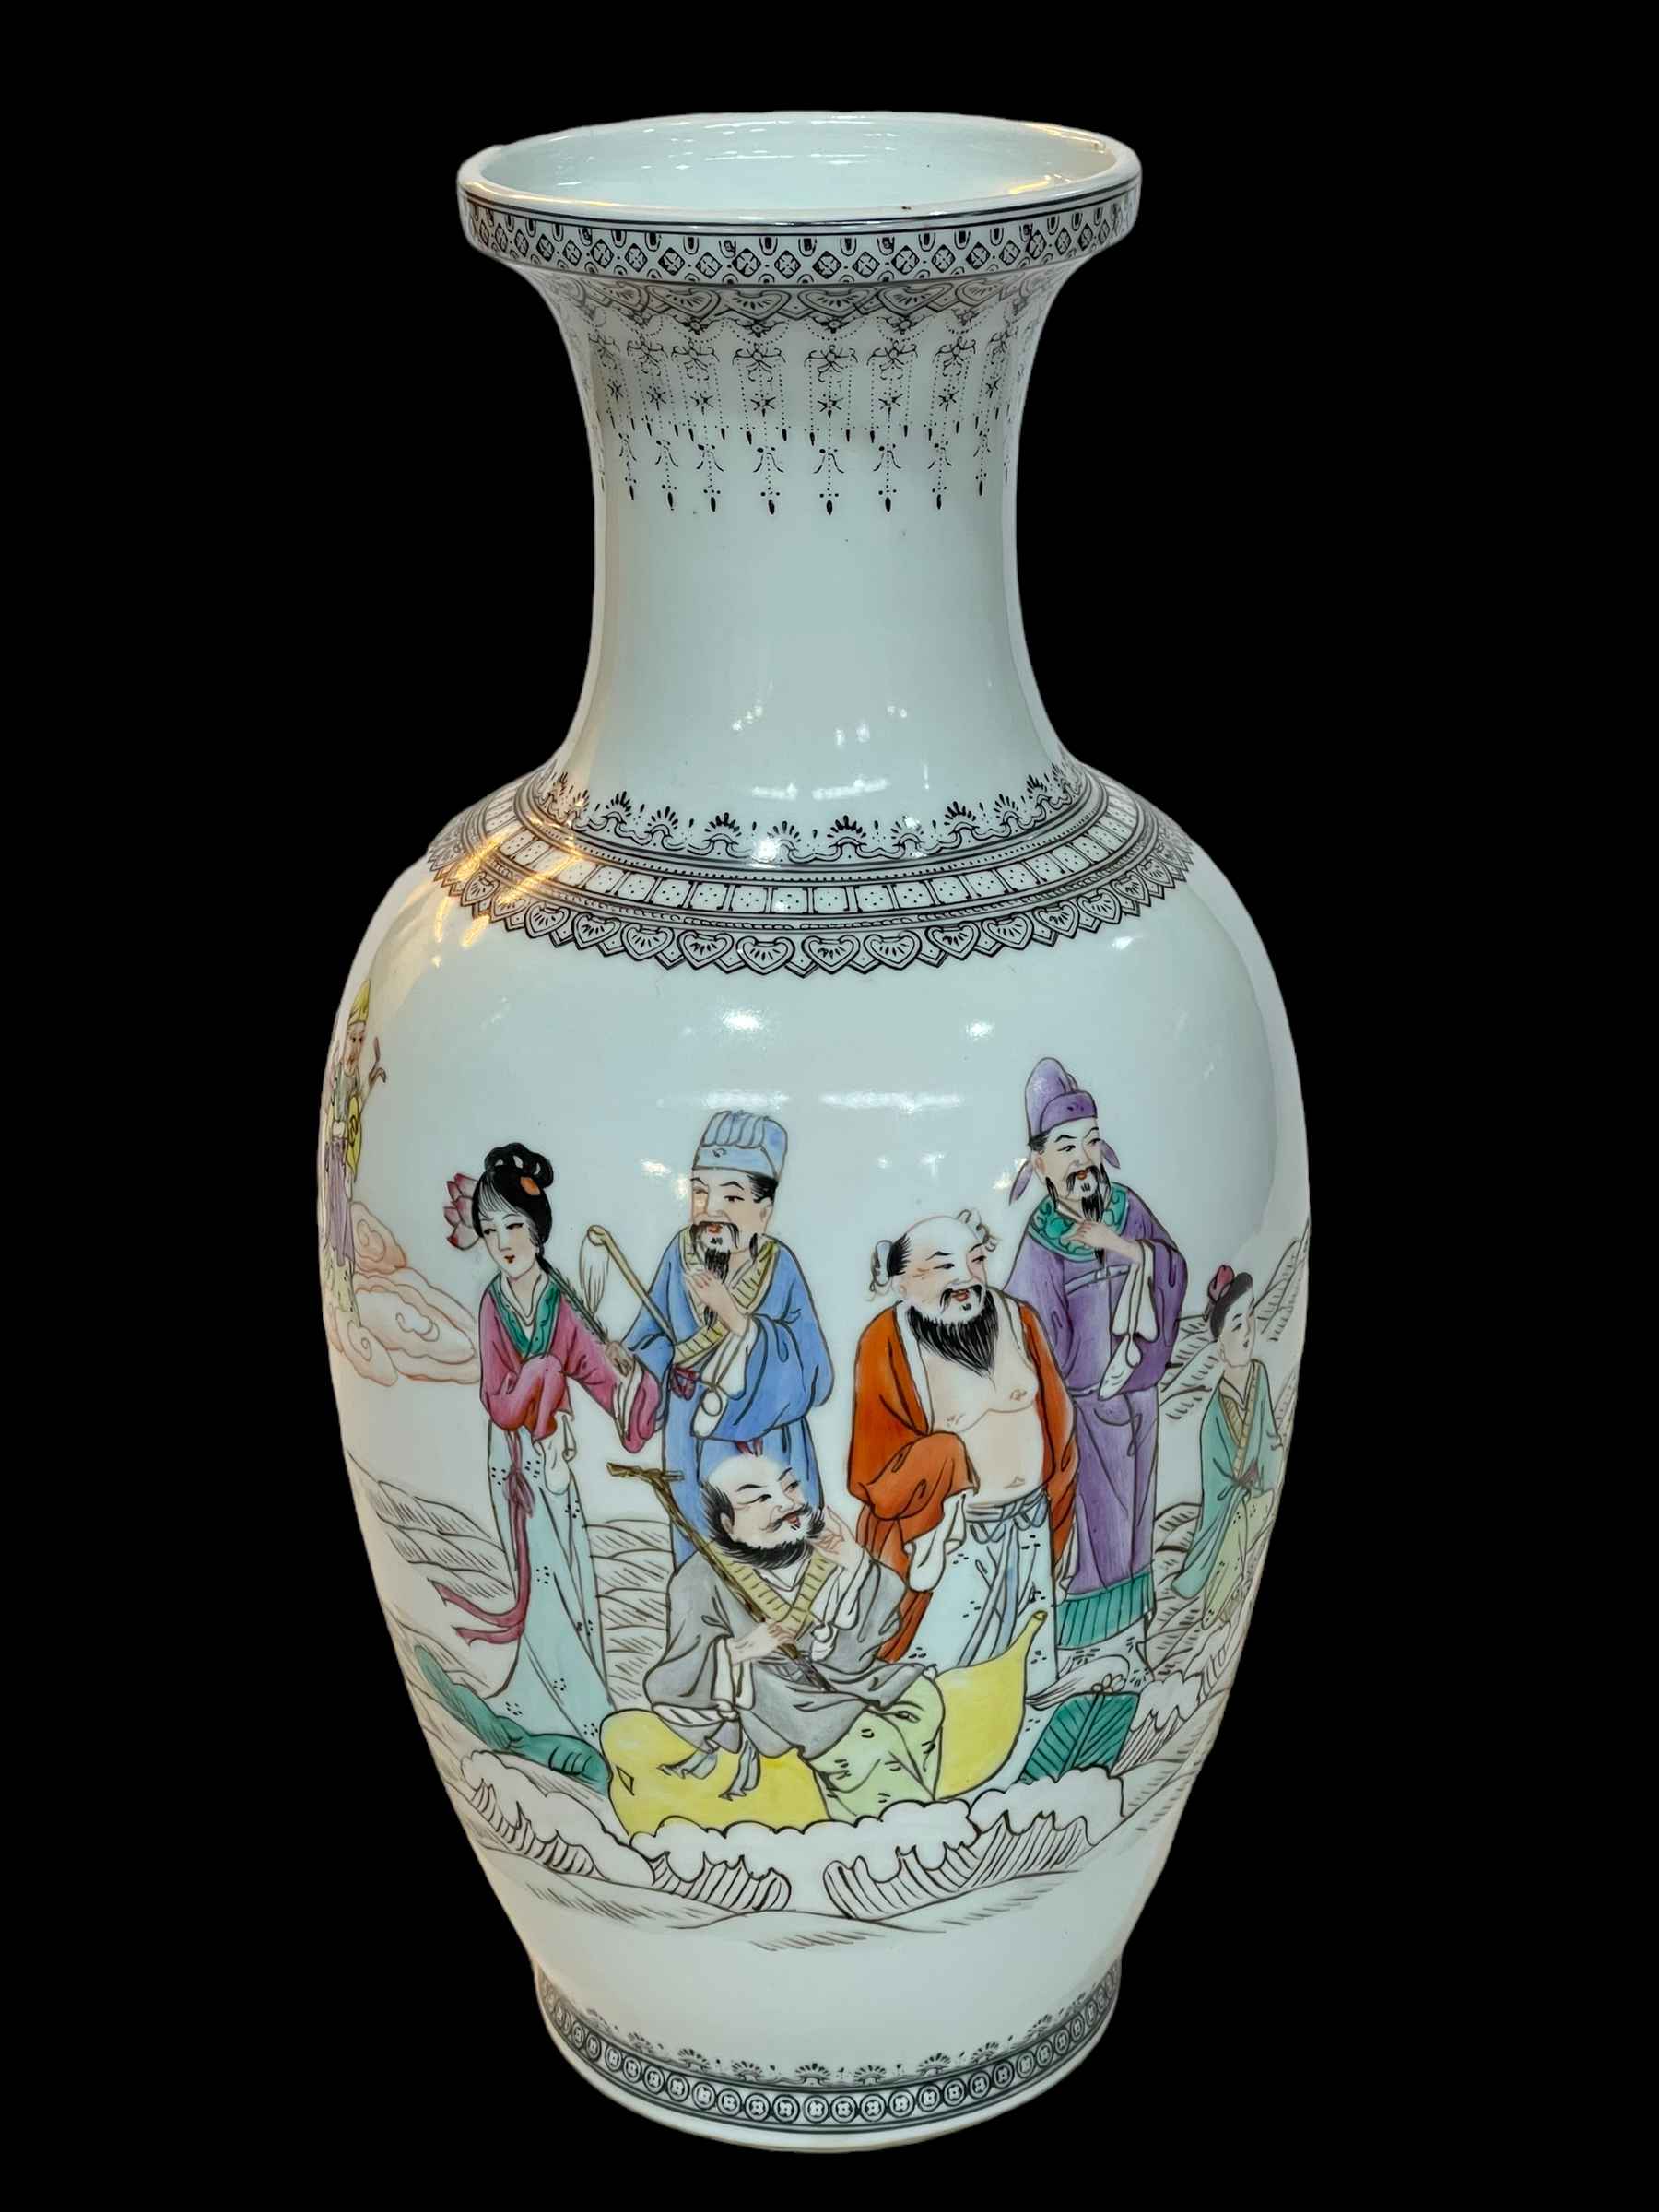 Large Chinese Republic vase decorated with figures and verse, red seal mark to base, 35.5cm.